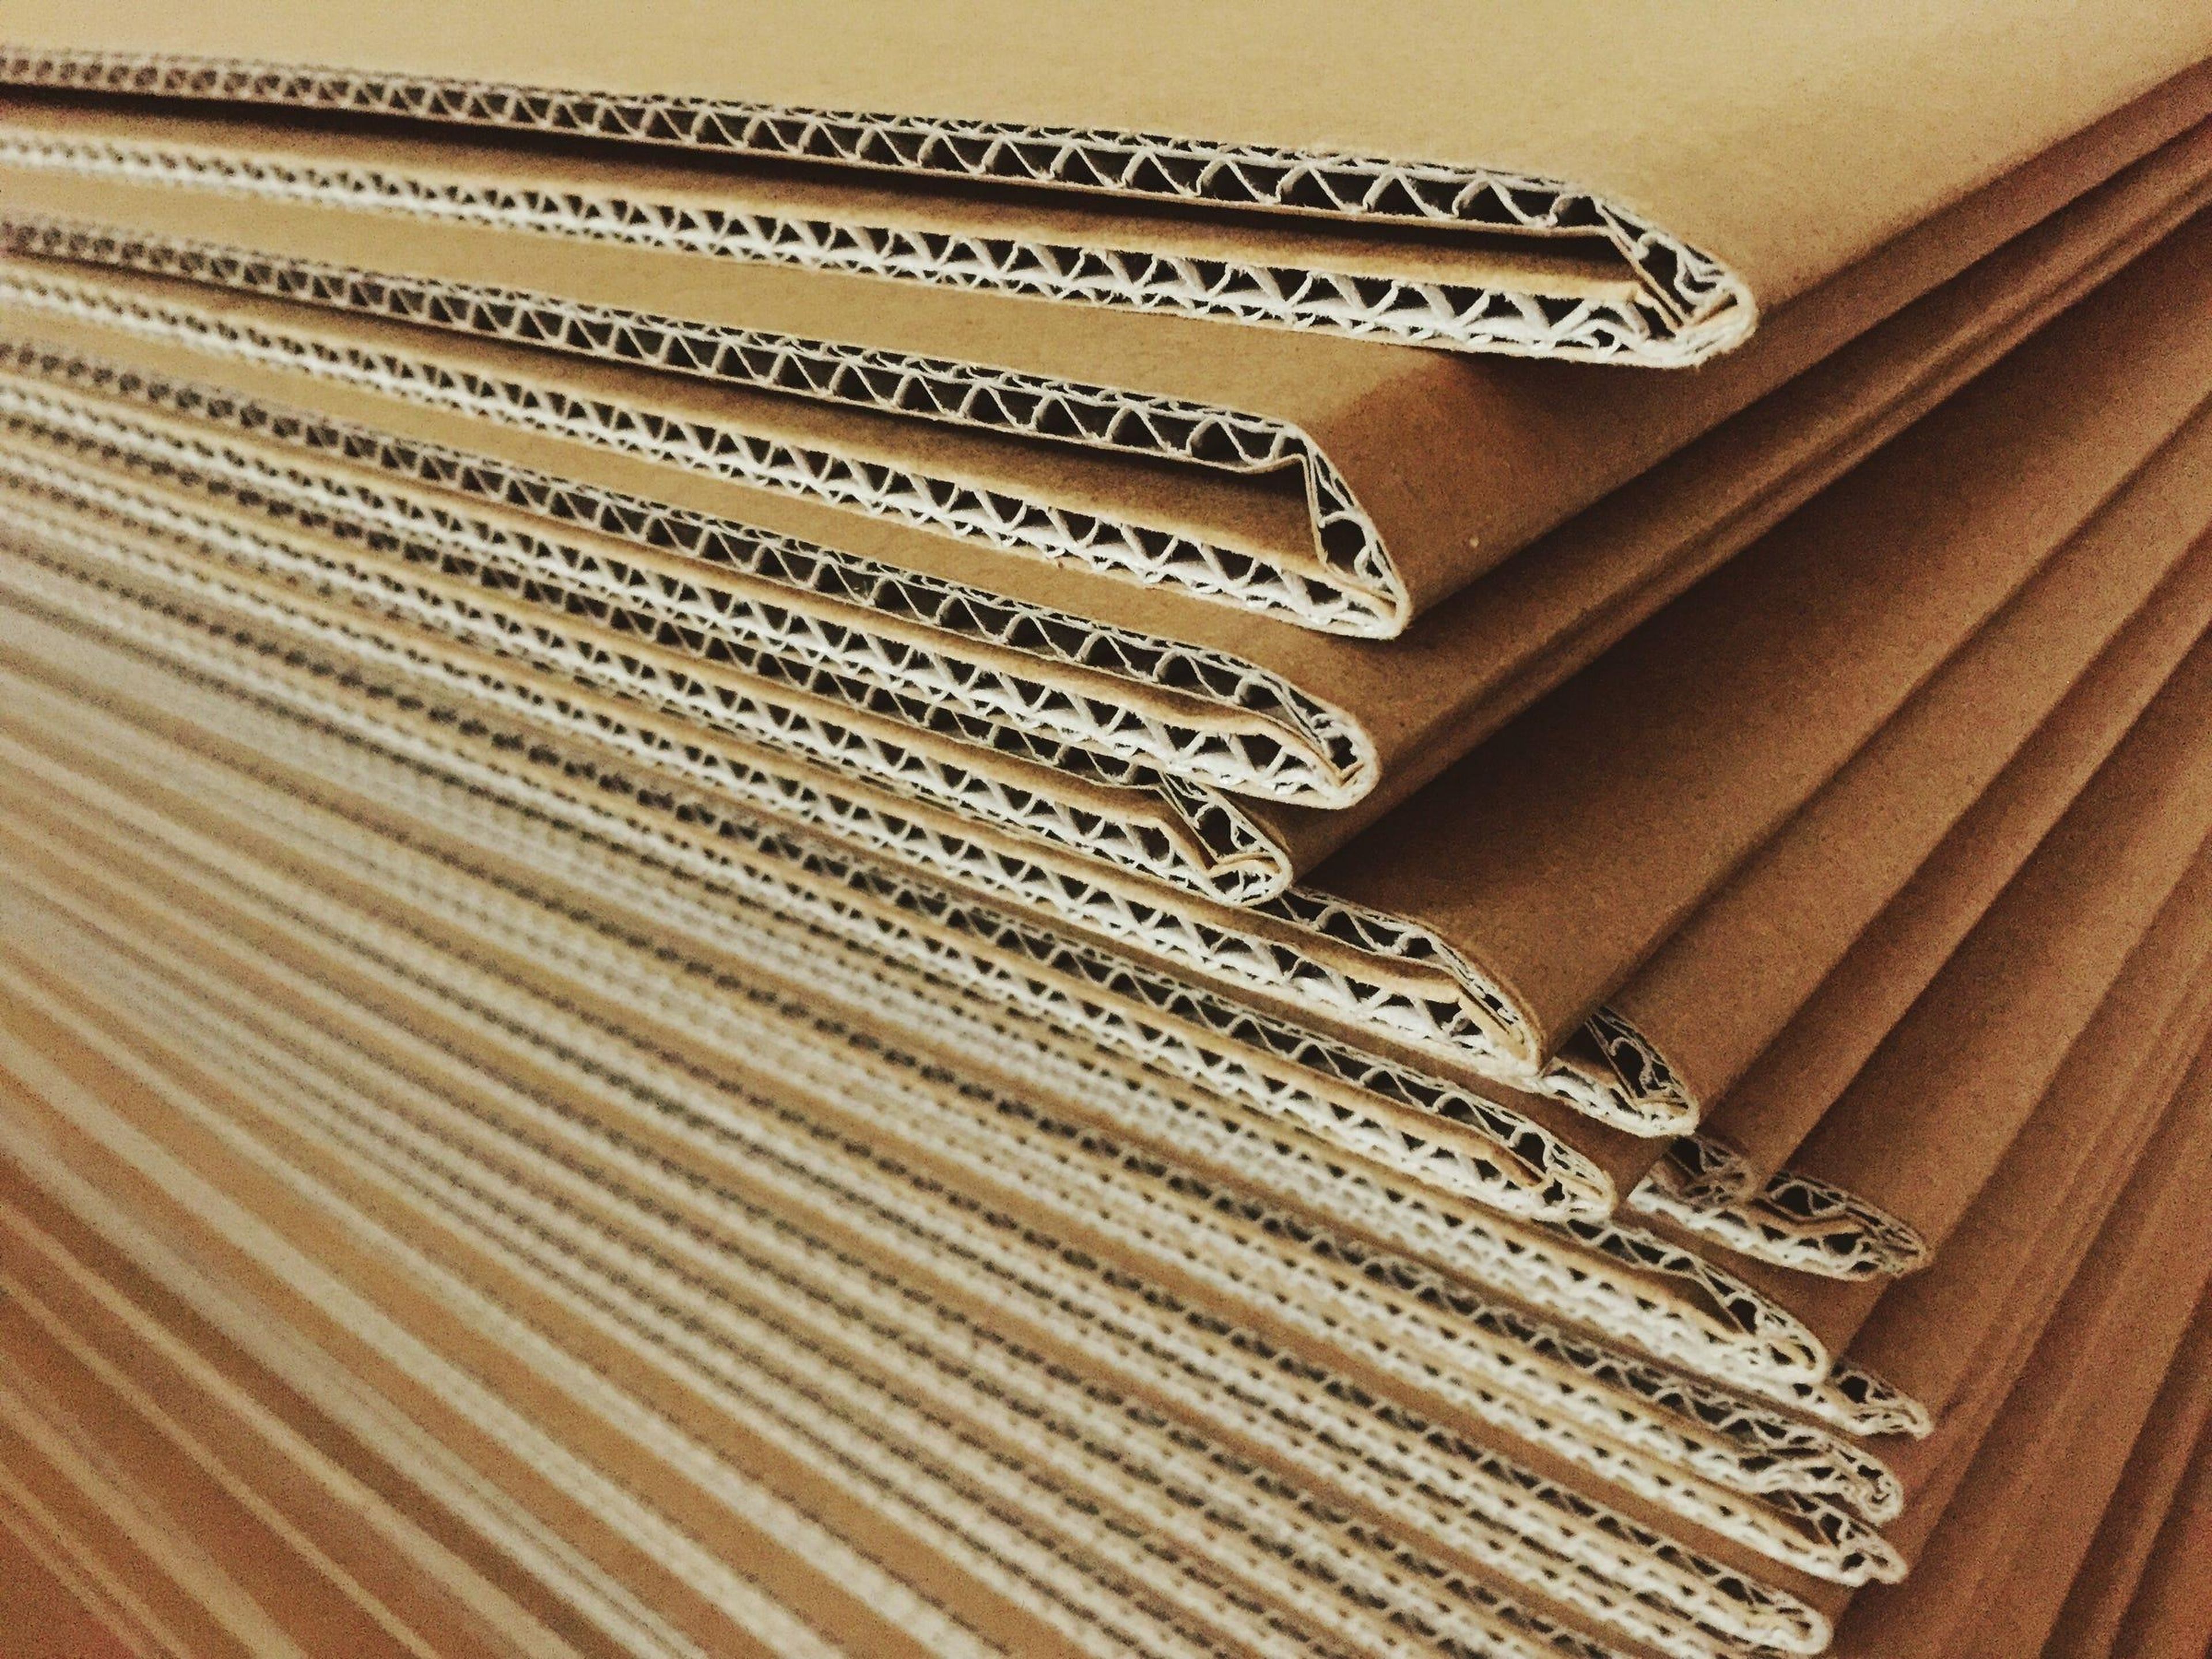 The humbled corrugated cardboard — which online retailers are ditching. Robert Kneschke / EyeEm